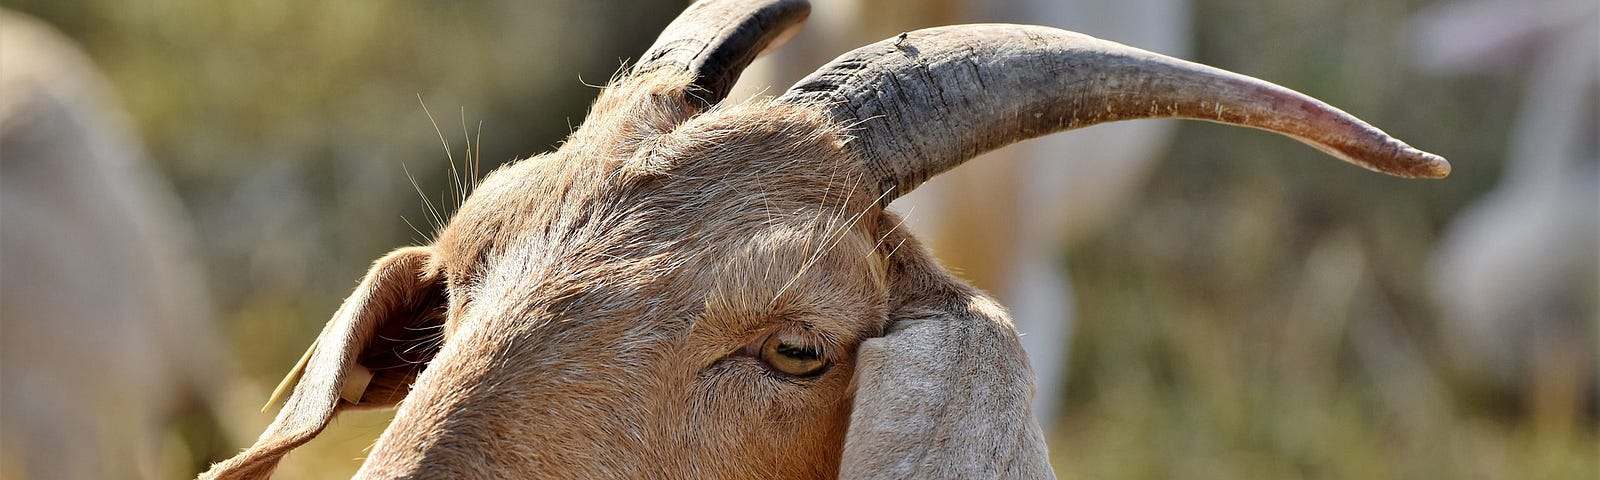 A tan goat with two horns standing on a hillside.